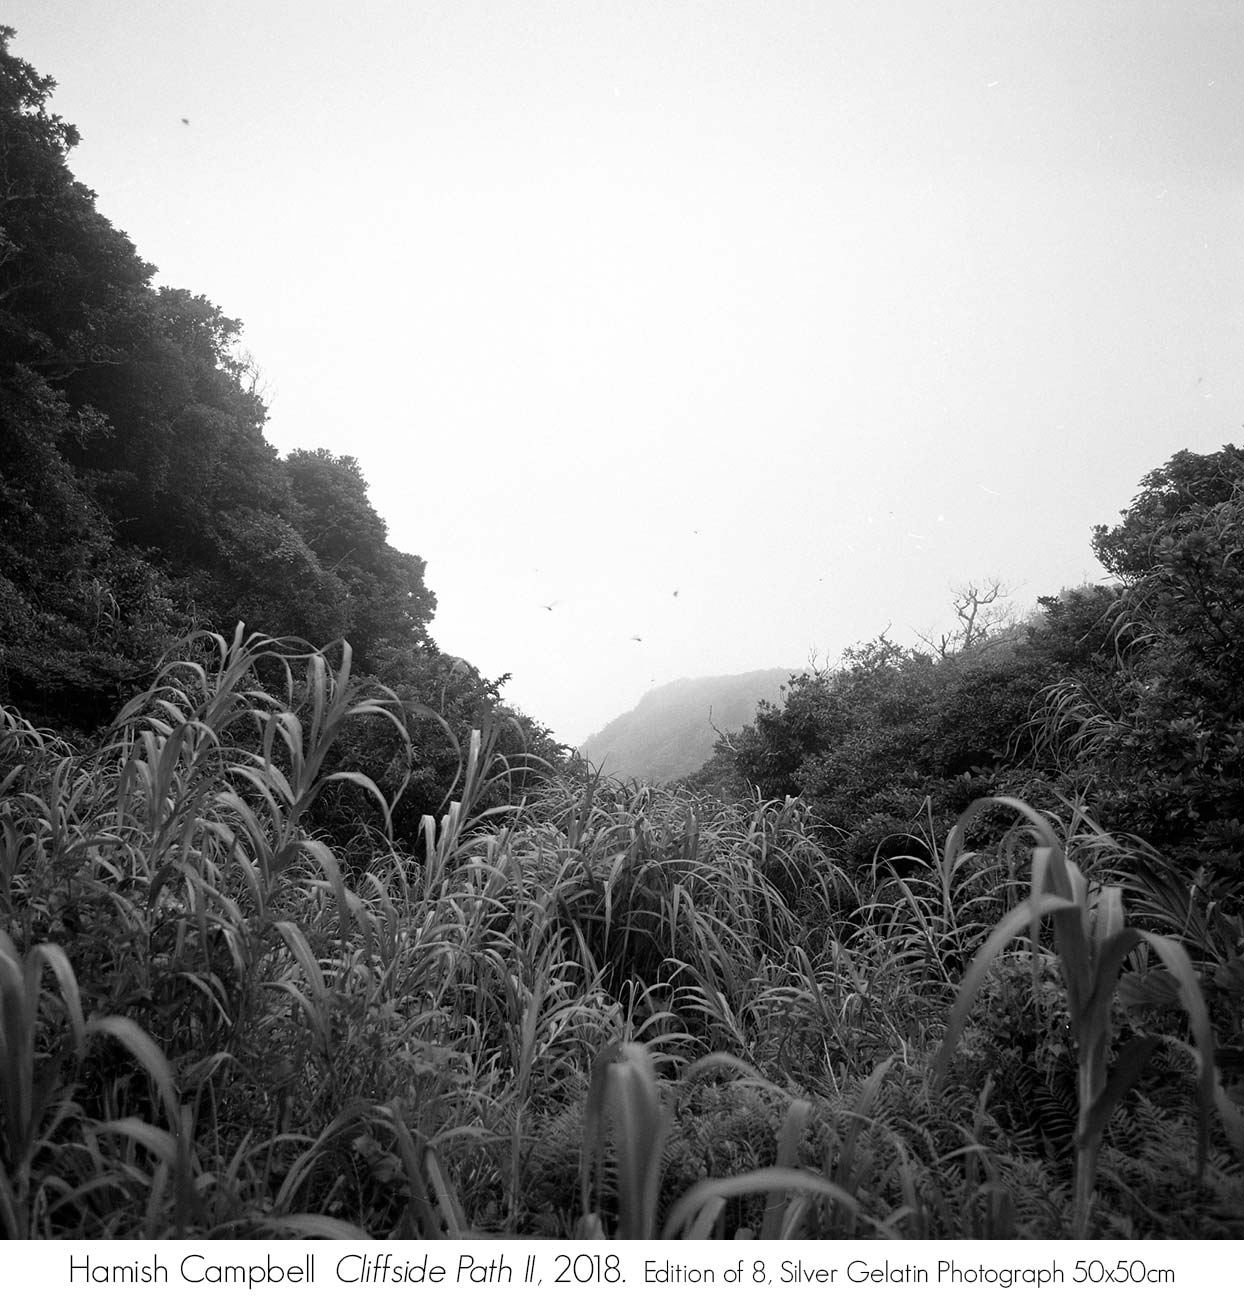 Hamish Campbell: Aogashima - life among the twin calderas. Head On Photo Festival 2018 Exhibition. Artsite Contemporary Galleries, Sydney 05 - 27 May 2018.